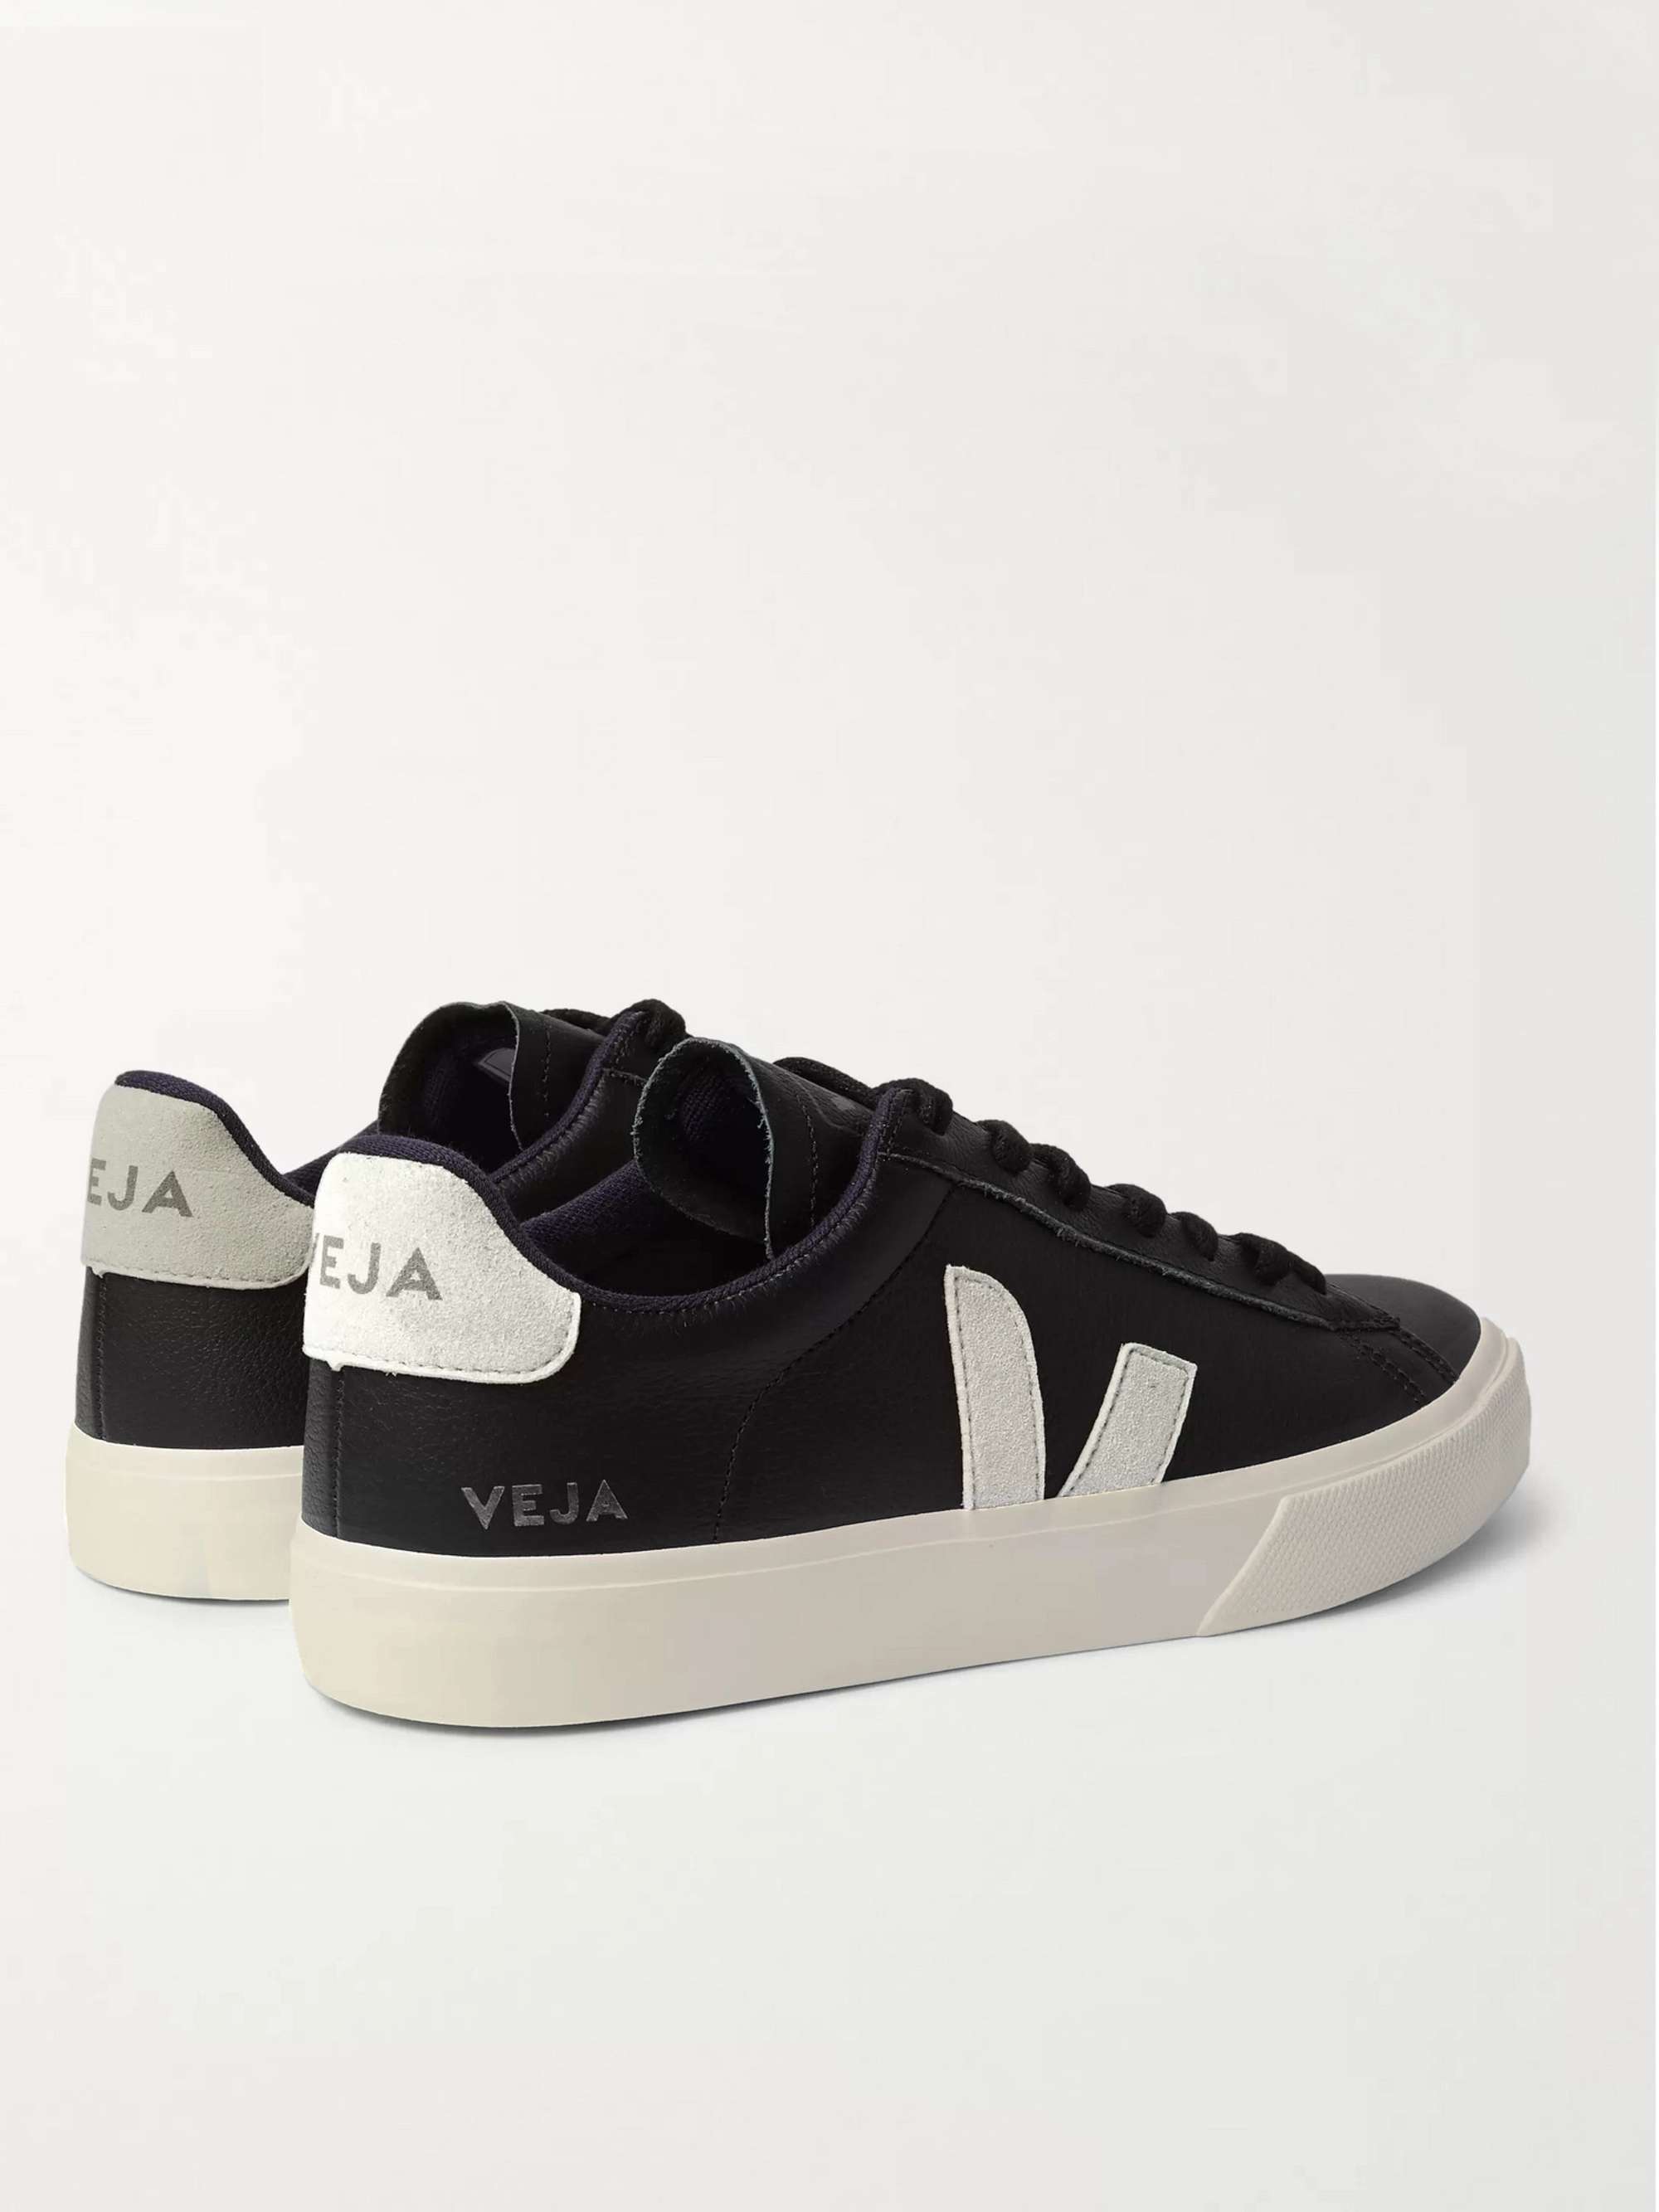 VEJA Campo Suede-Trimmed Leather Sneakers